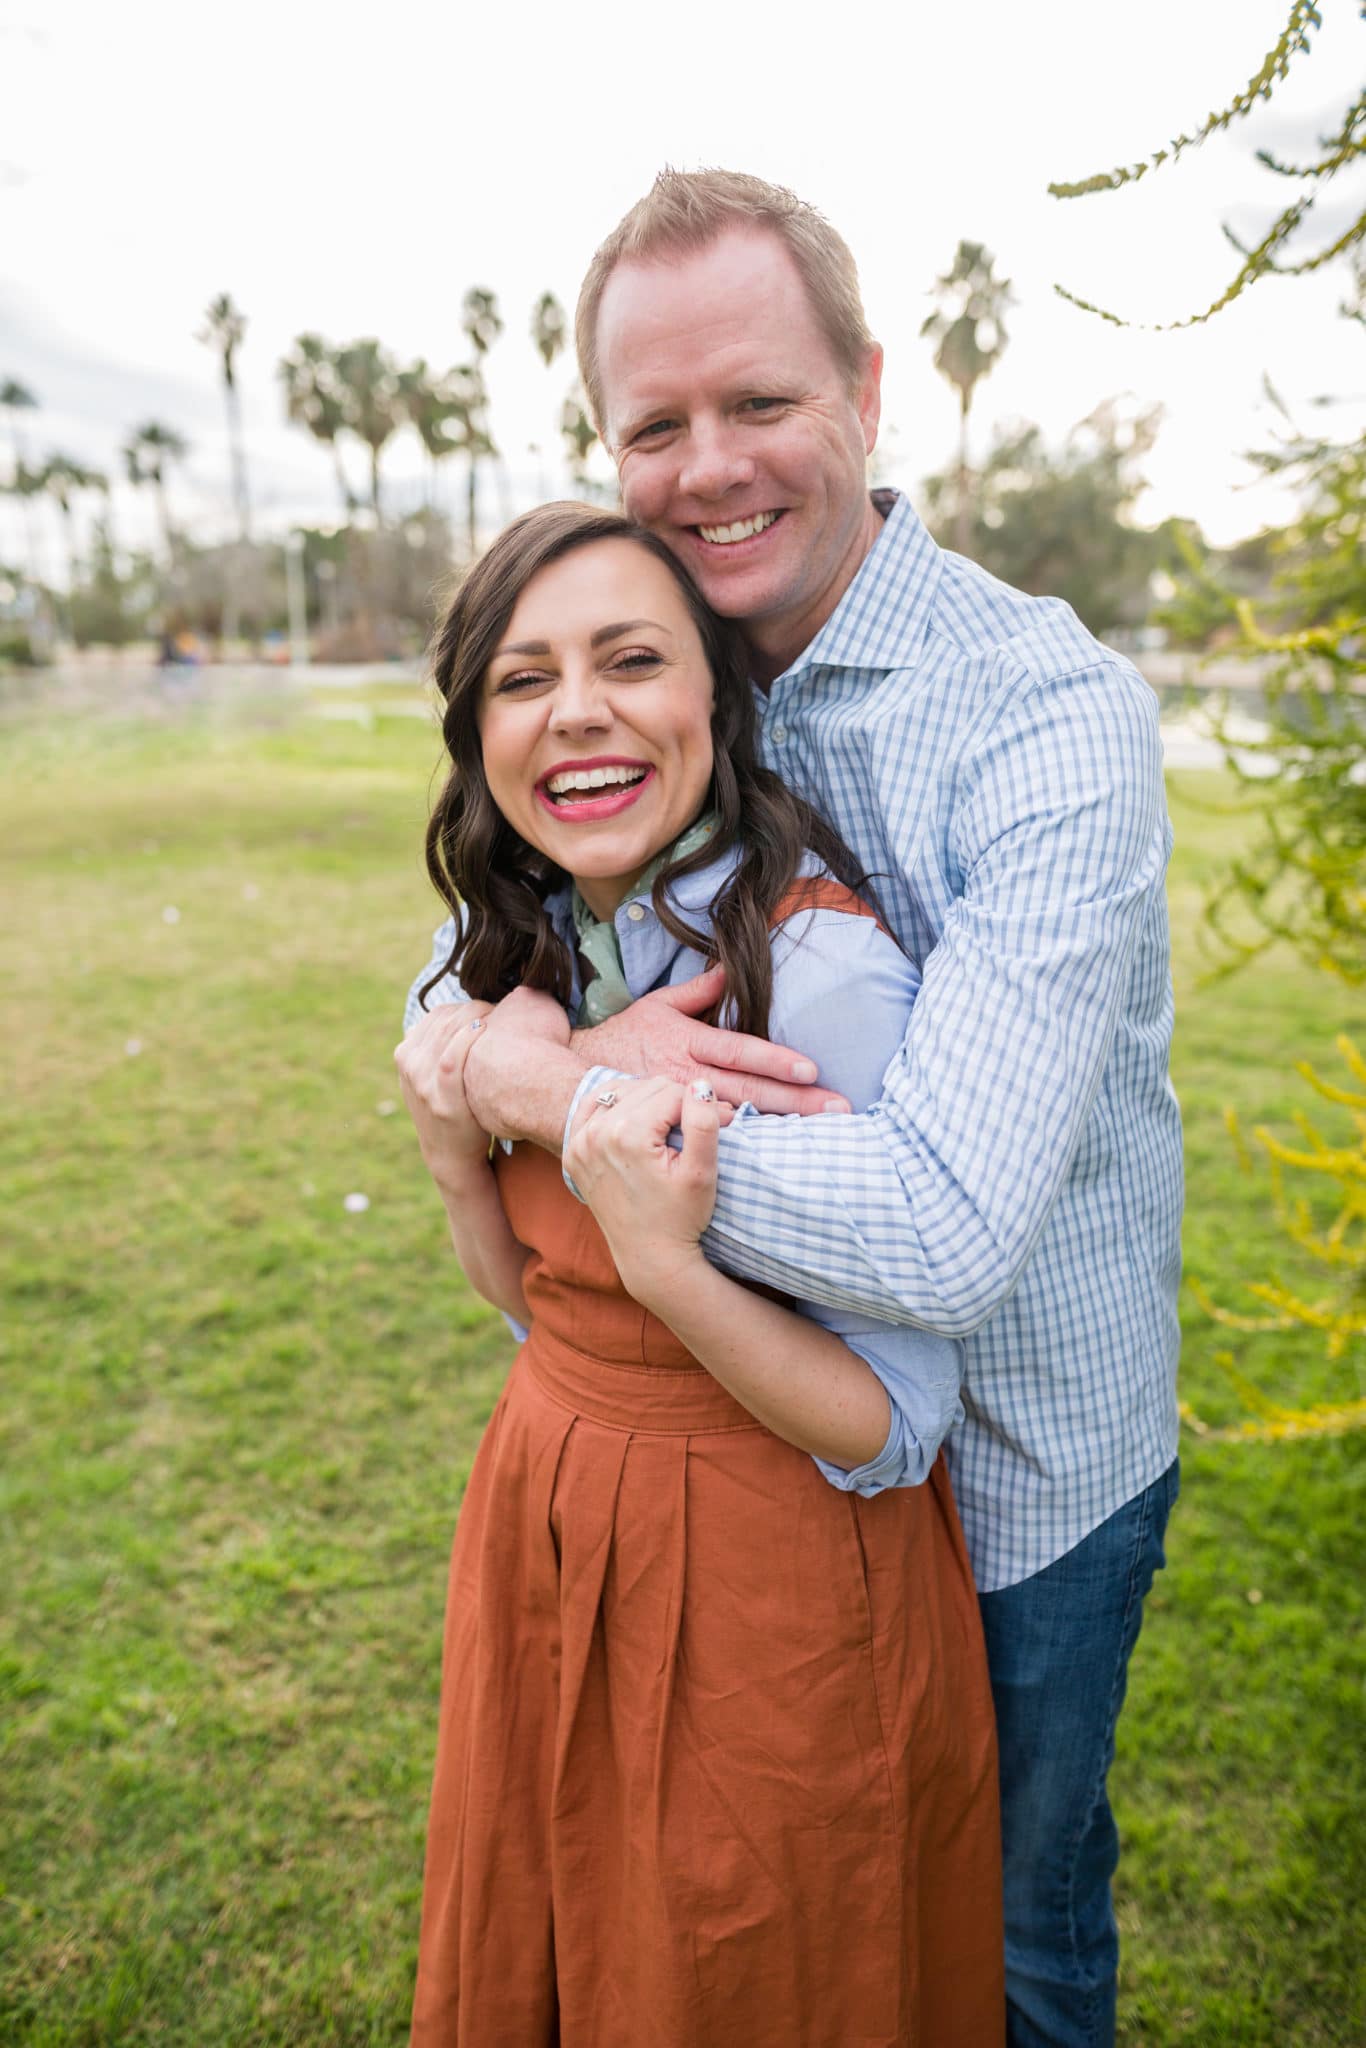 Couples Photography: Tips For Excellent Couple Photos